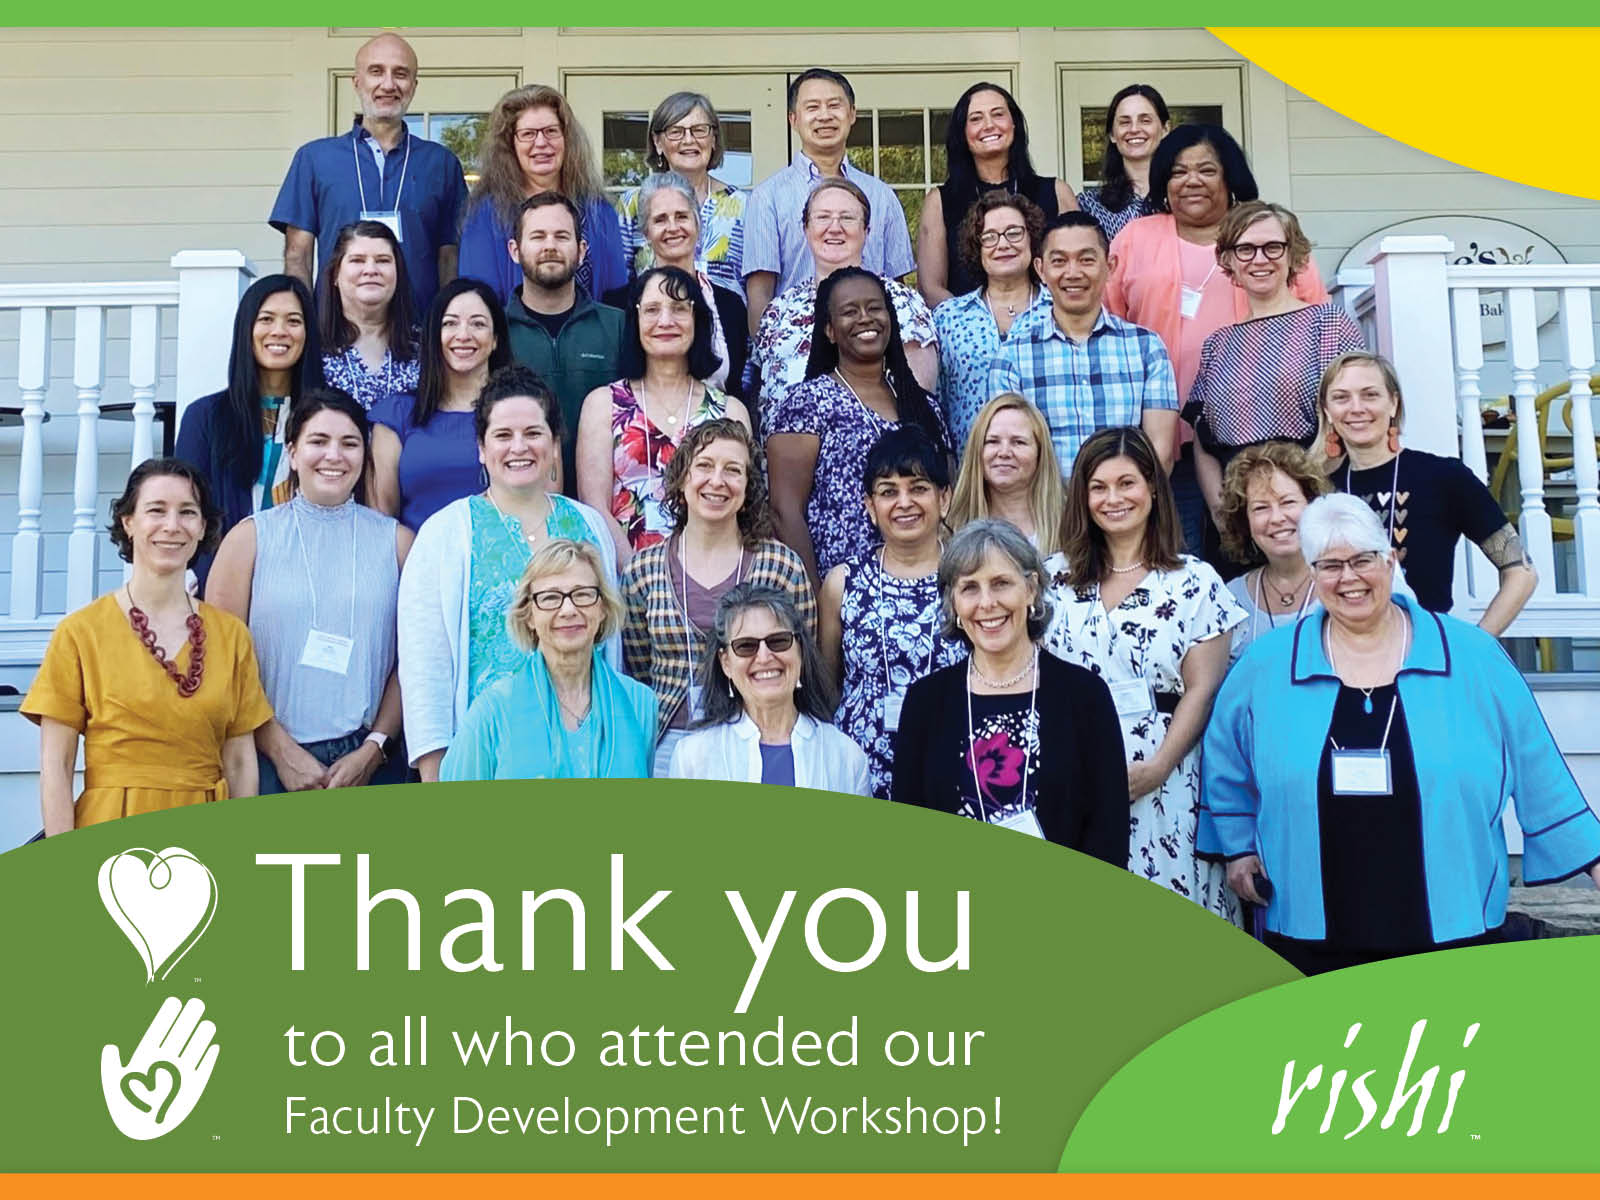 Thank you to all who attended our Faculty Development Workshop! RISHI